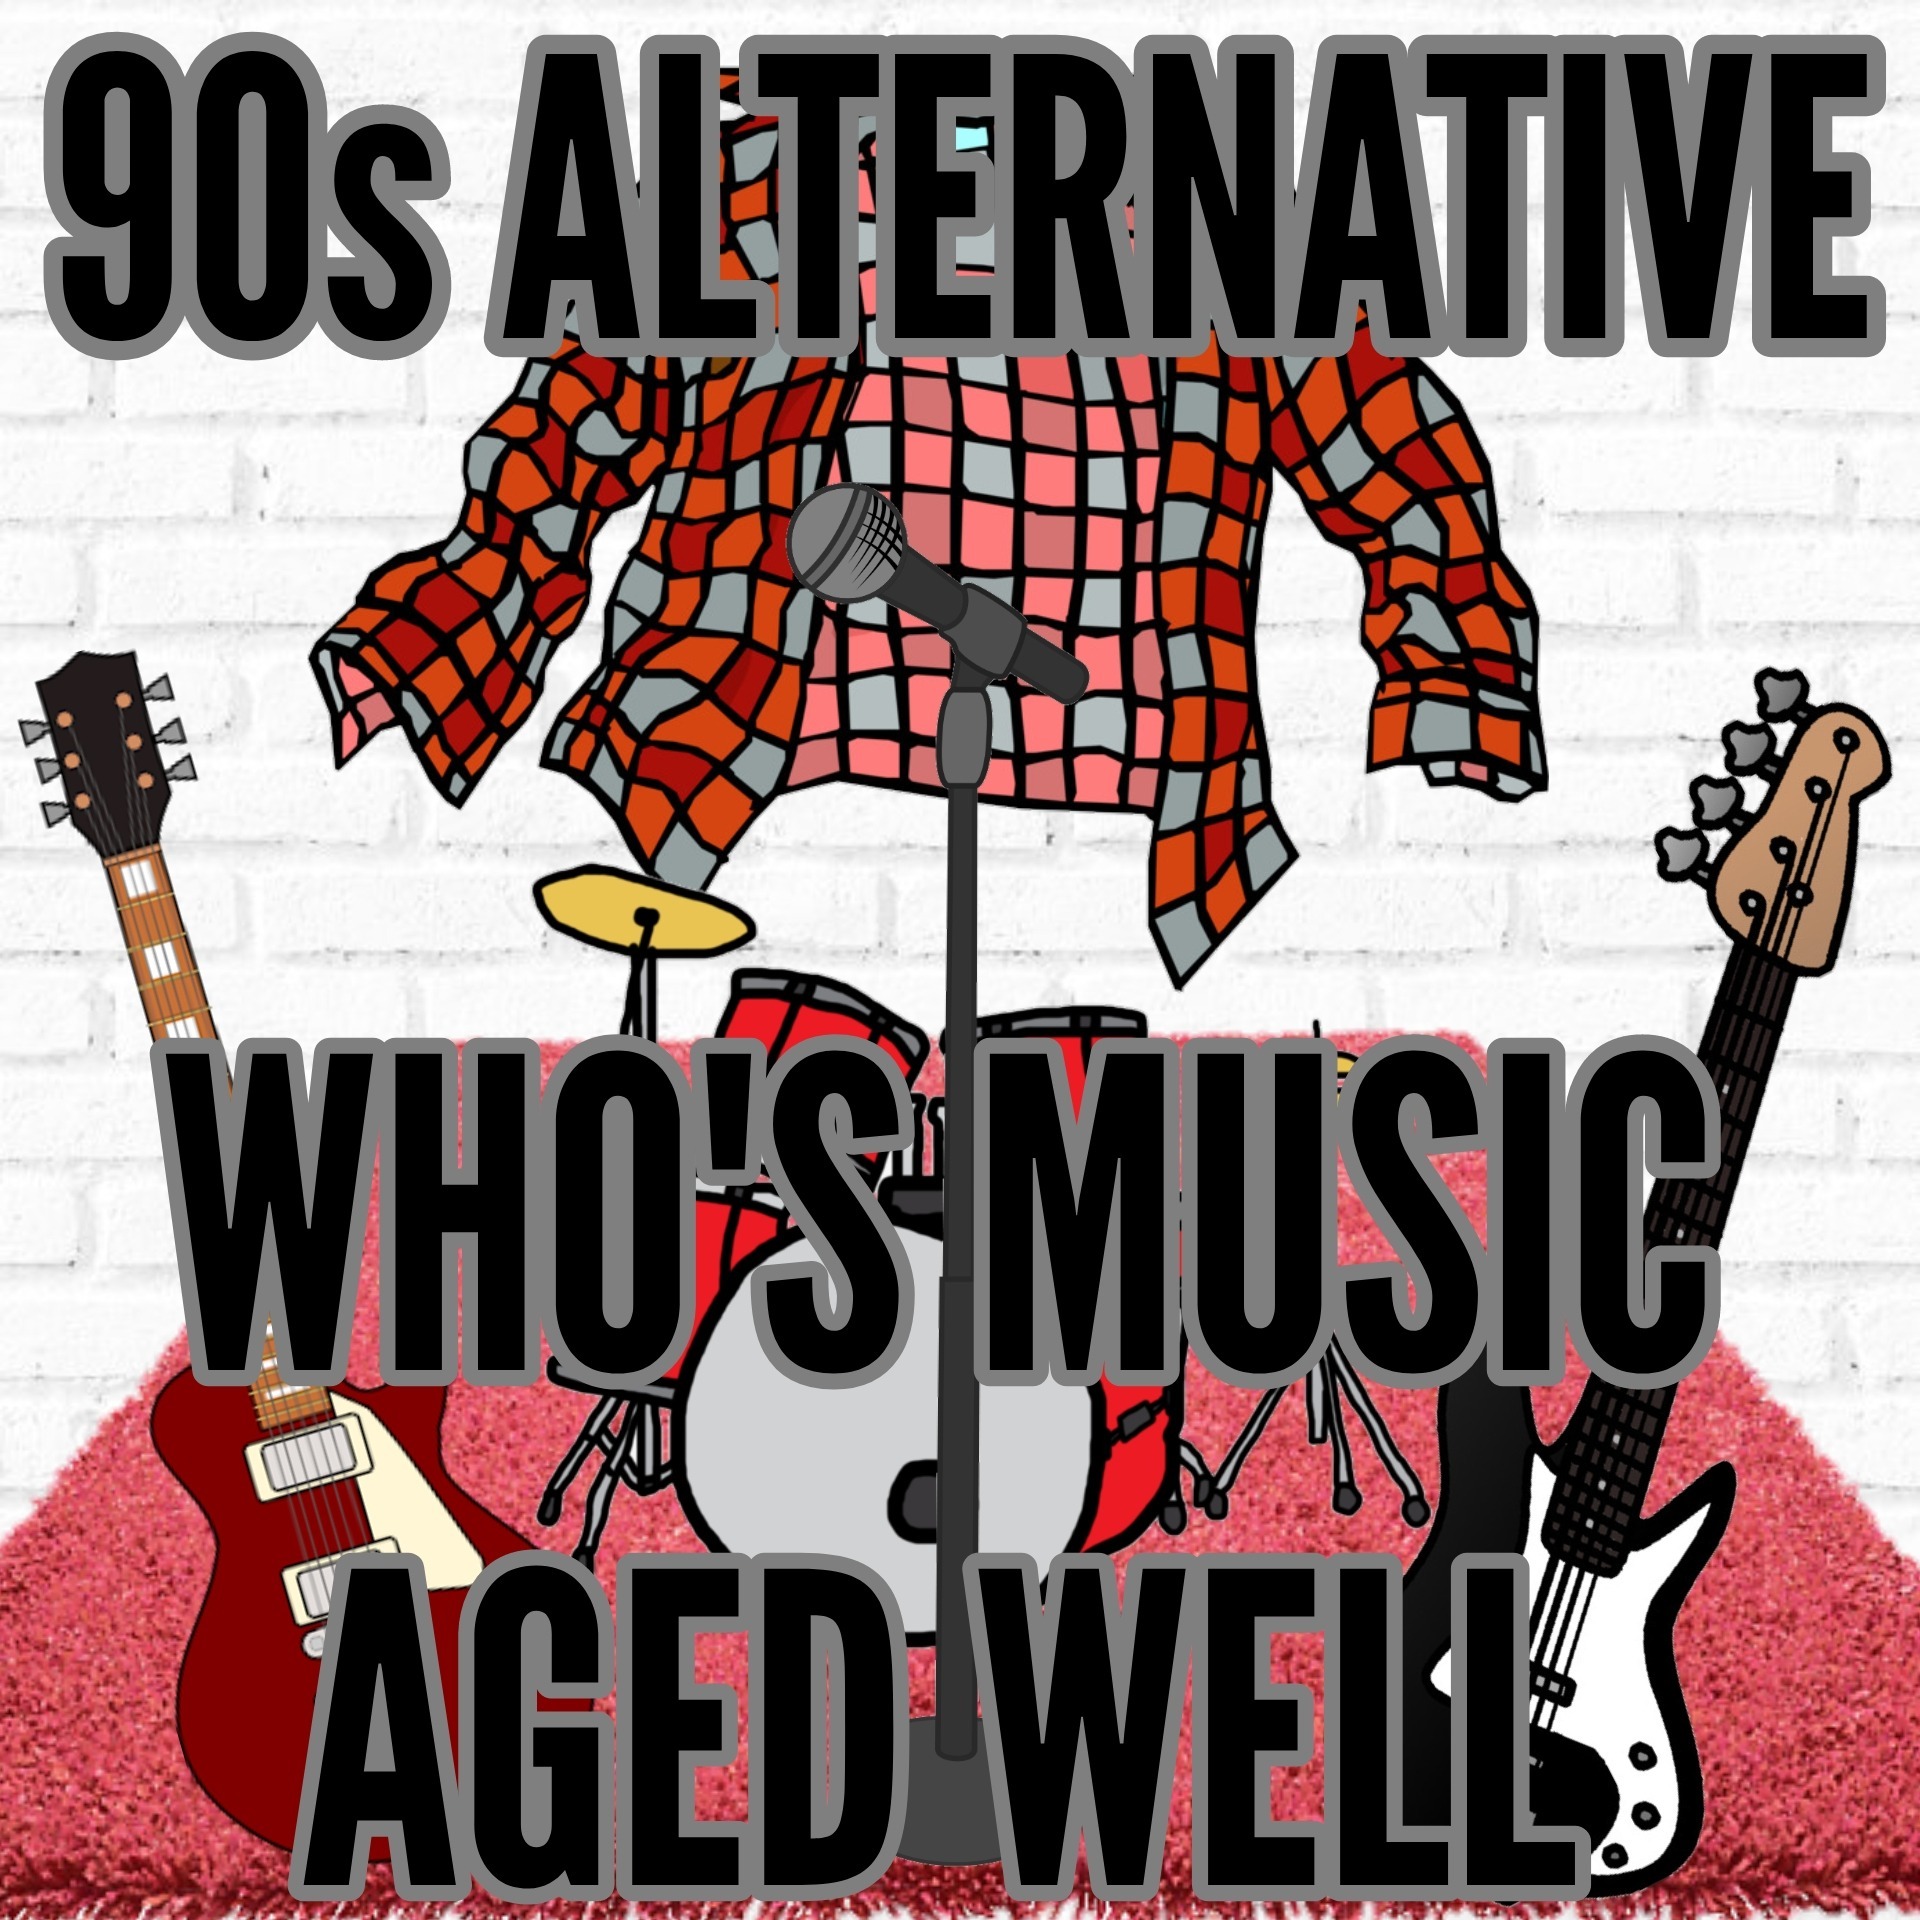 90s Alternative Rock - Which Bands Music Aged Well? Who's Did NOT?